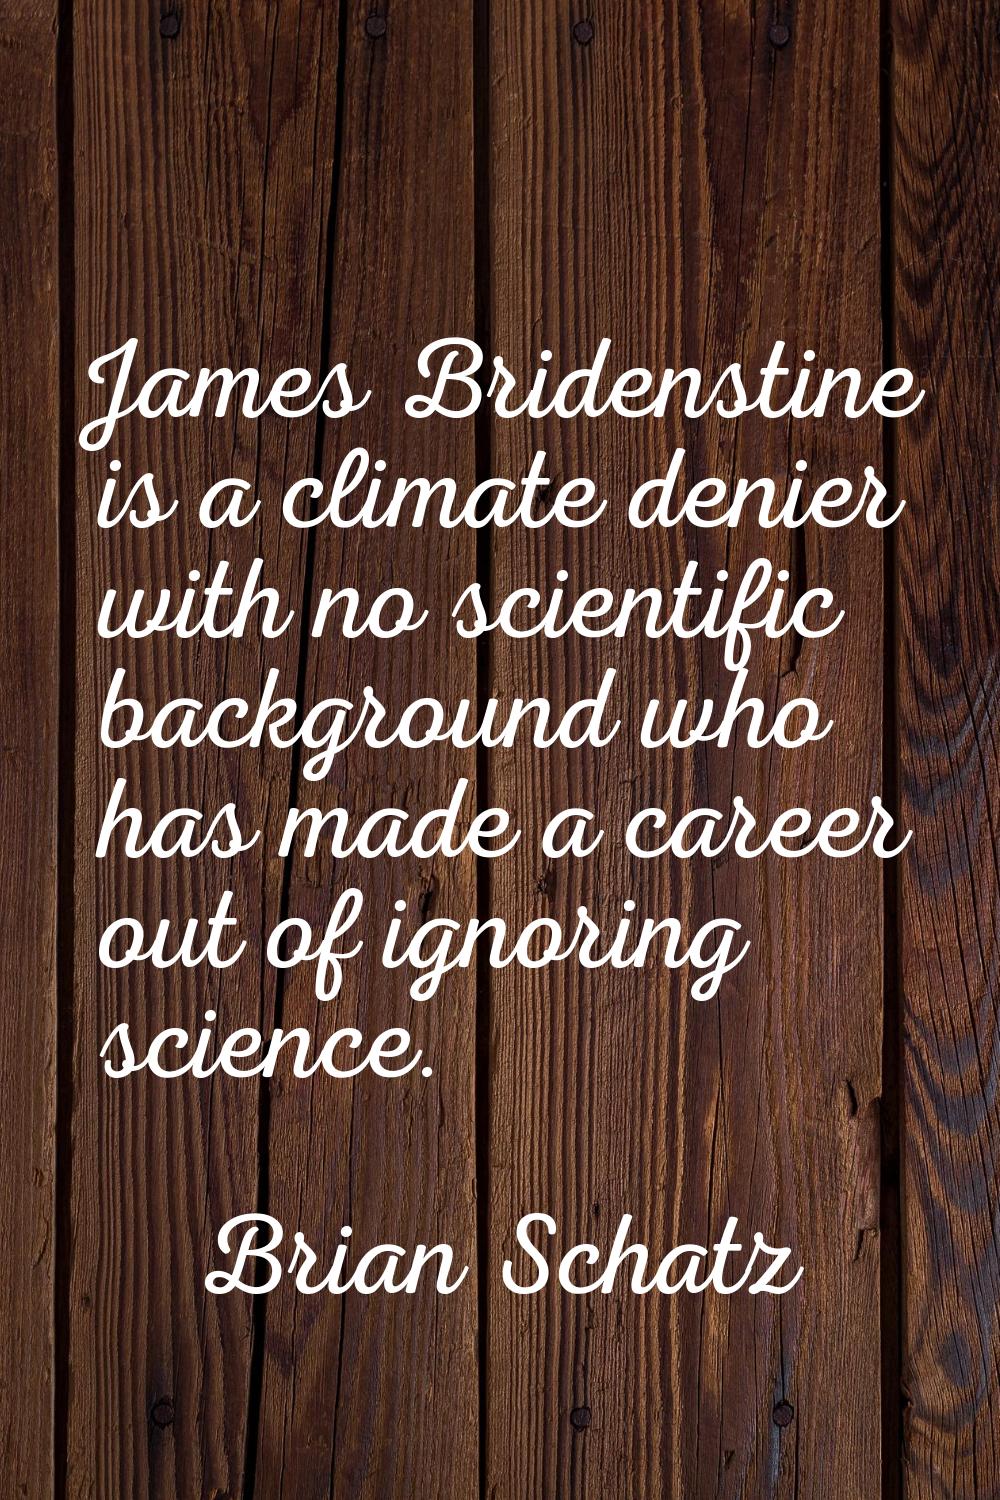 James Bridenstine is a climate denier with no scientific background who has made a career out of ig